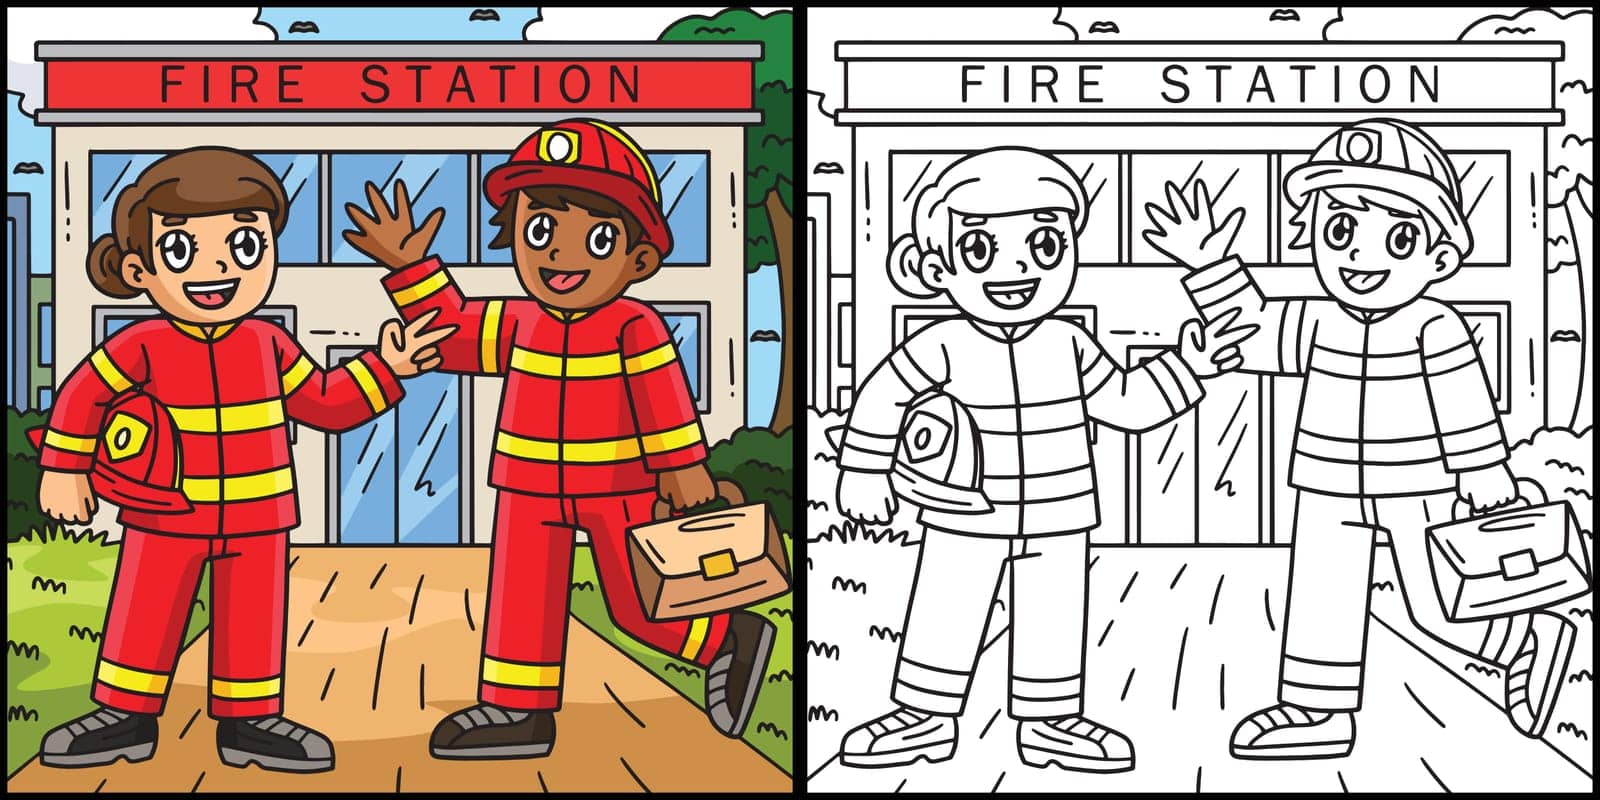 Firefighter Friend Coloring Colored Illustration by abbydesign